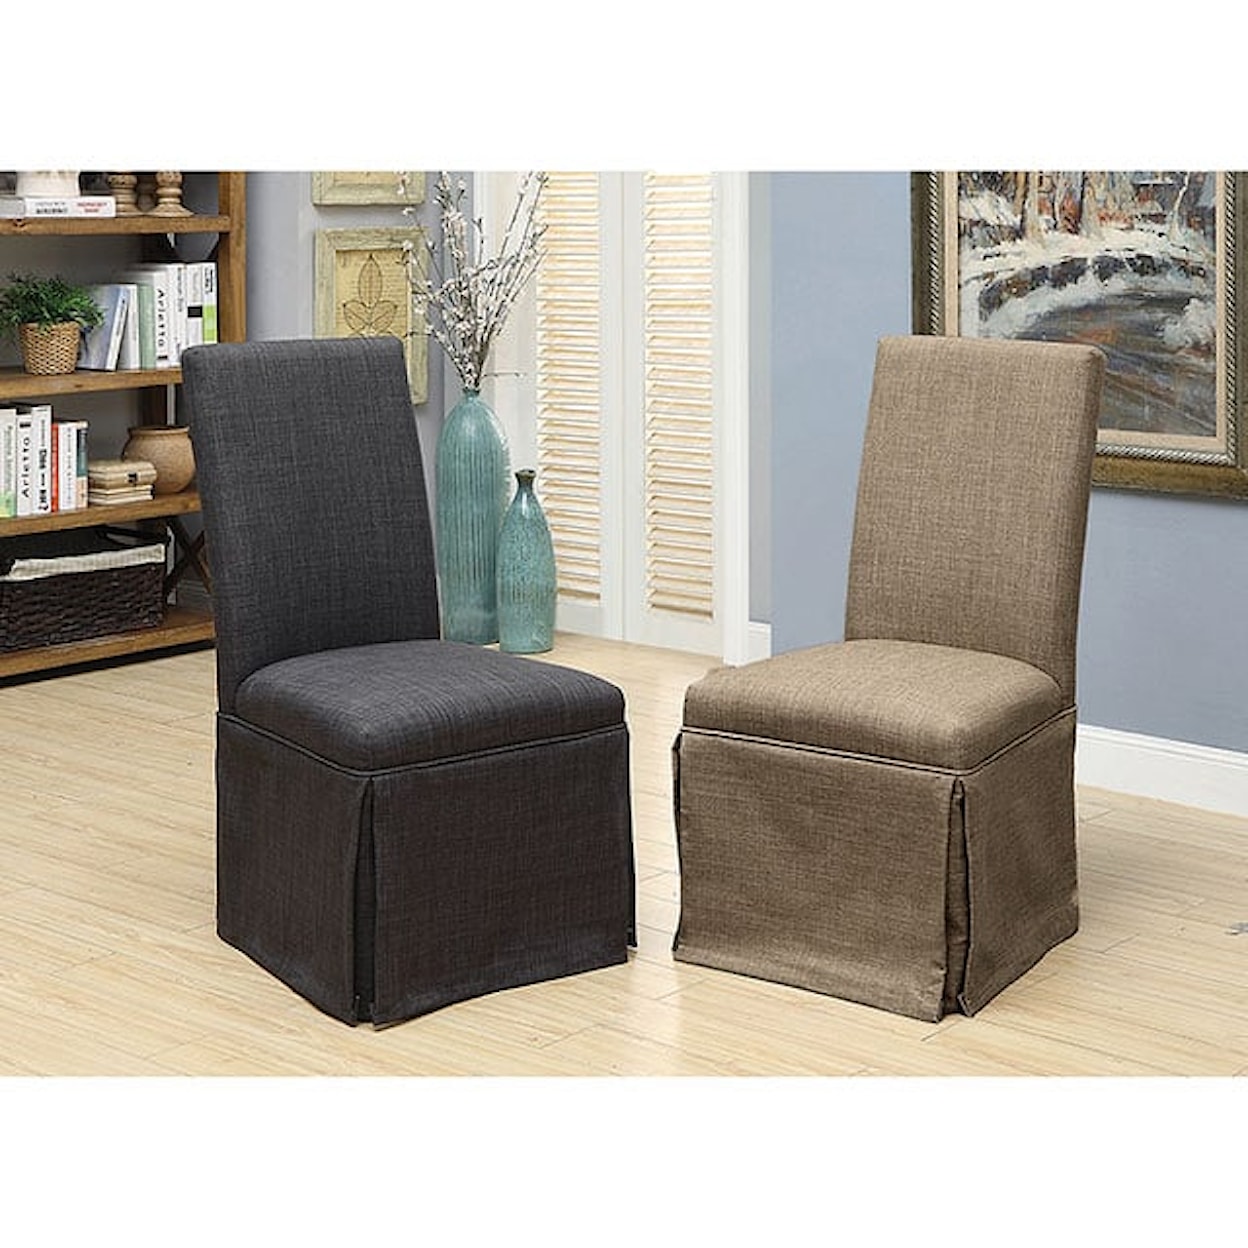 Furniture of America - FOA Kortrijk  Skirted Accent Chairs with Welting Trim